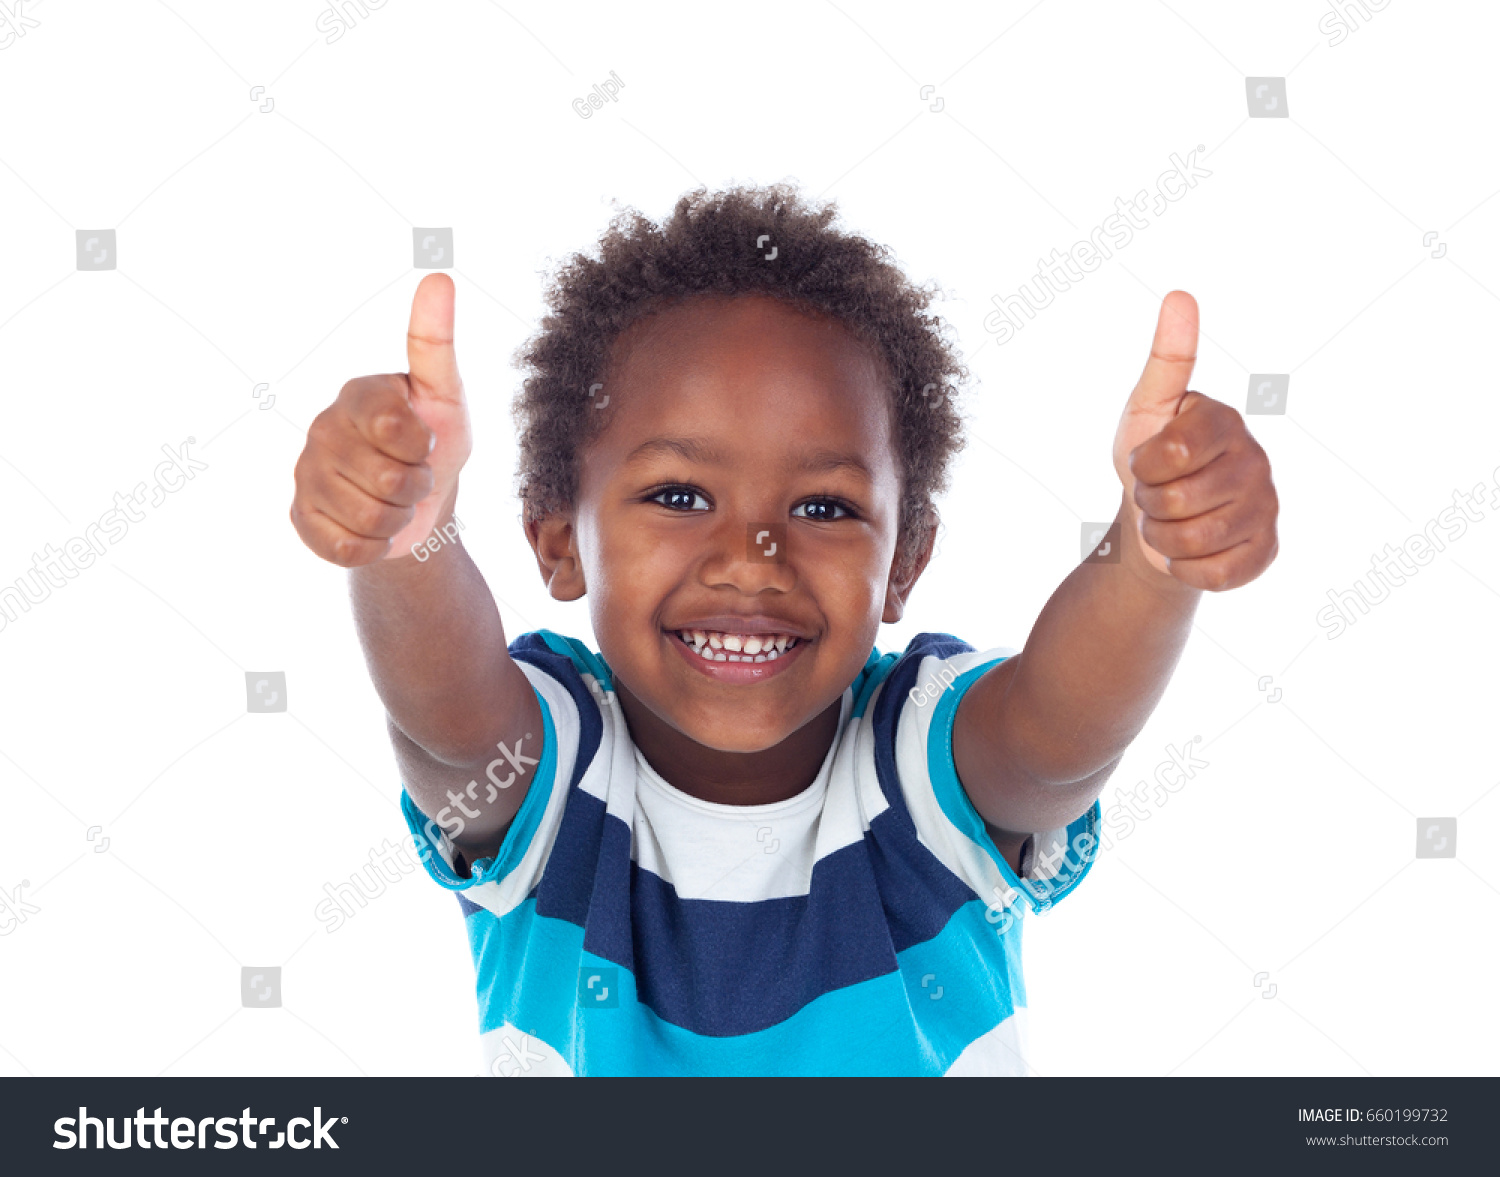 2,574 Baby yes Images, Stock Photos & Vectors | Shutterstock